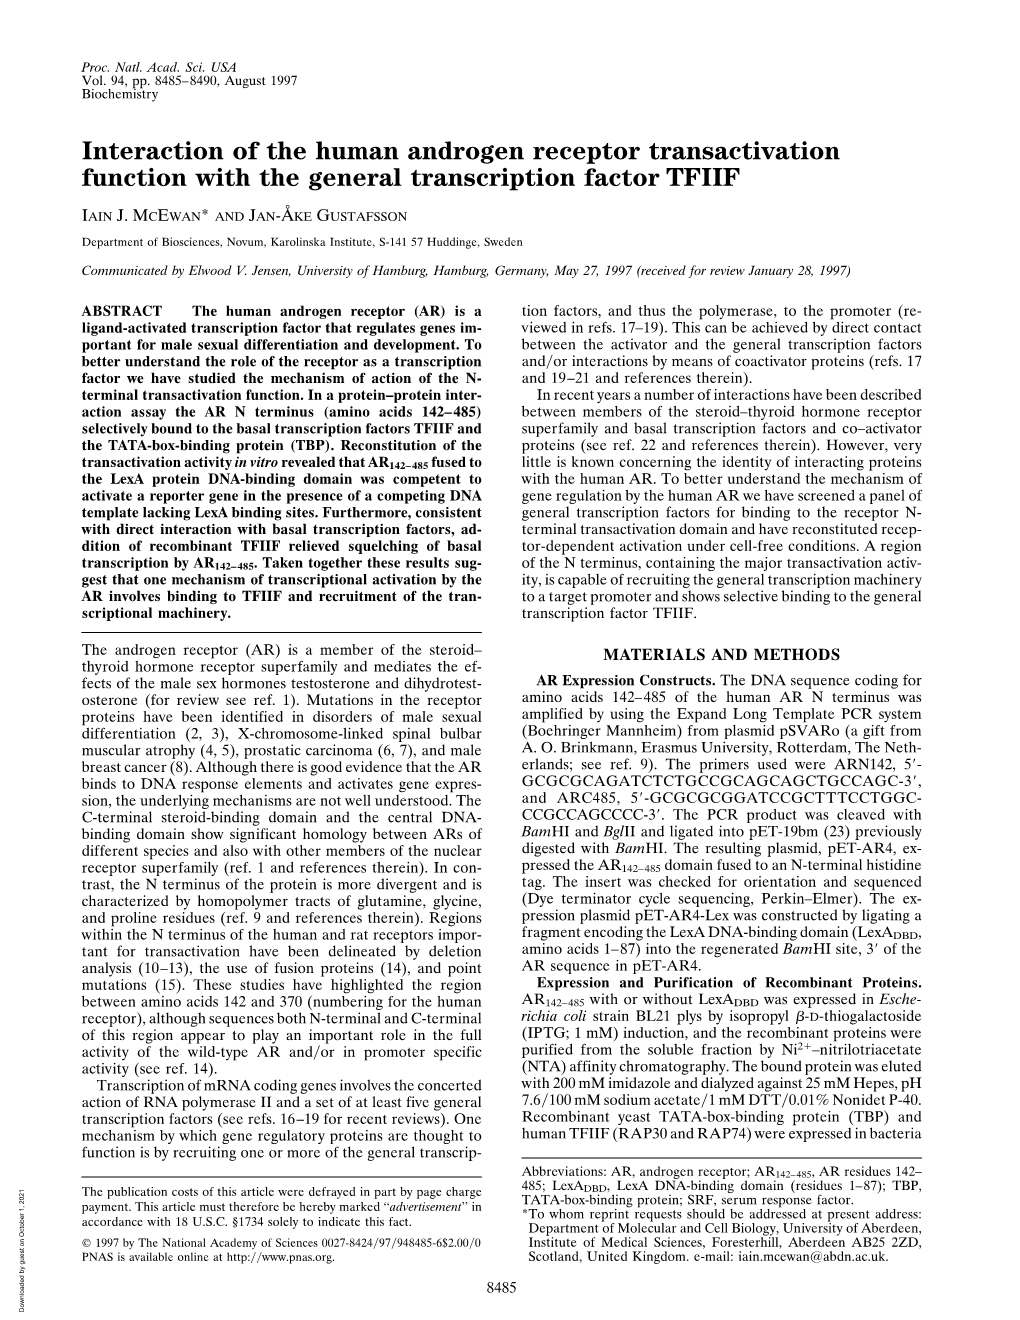 Interaction of the Human Androgen Receptor Transactivation Function with the General Transcription Factor TFIIF